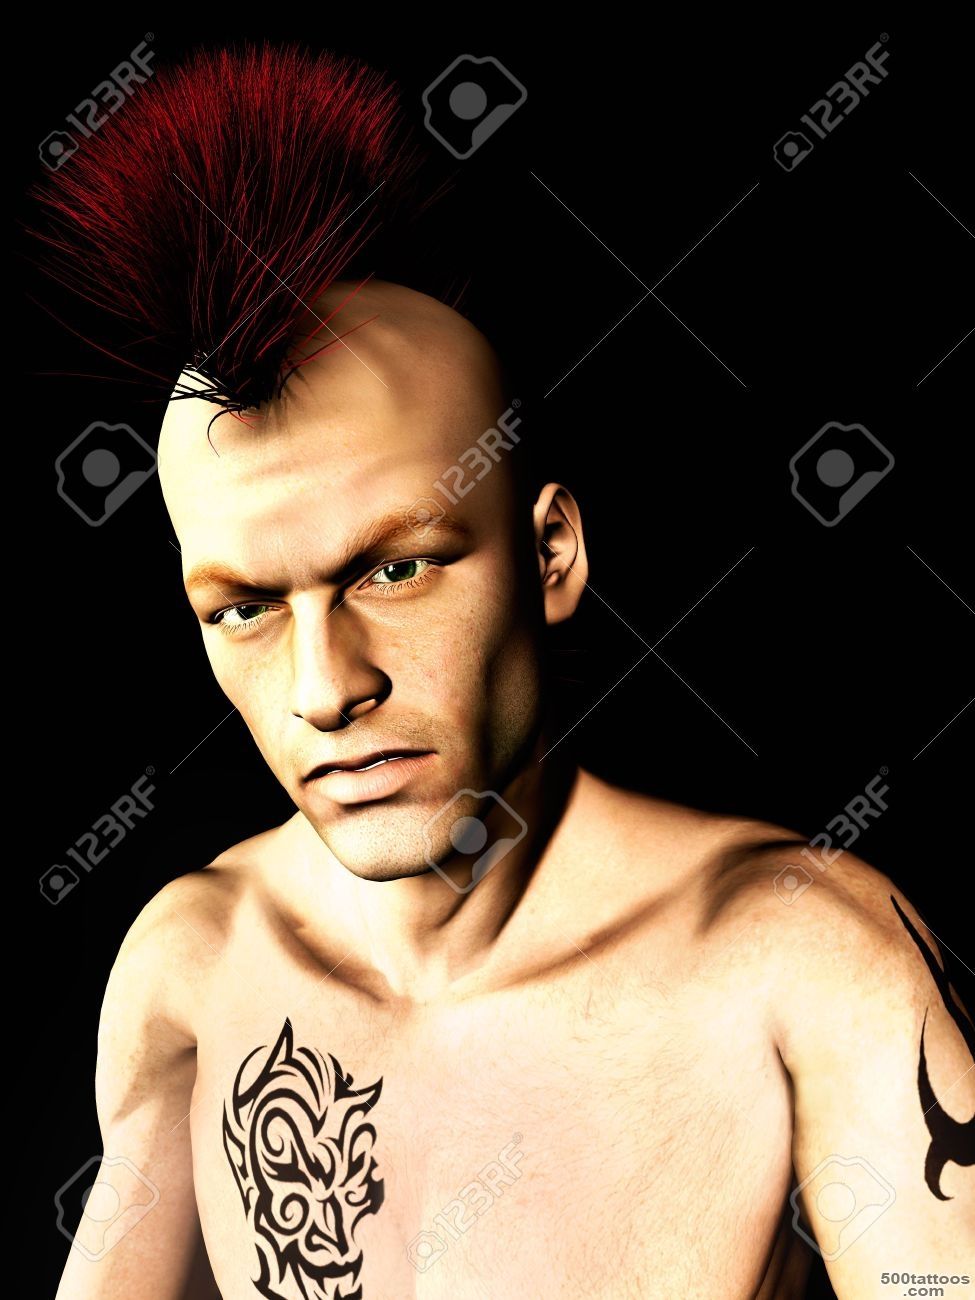 A Male Punk Rocker With A Mohawk Hair And A Tattoo On His Arm ..._36